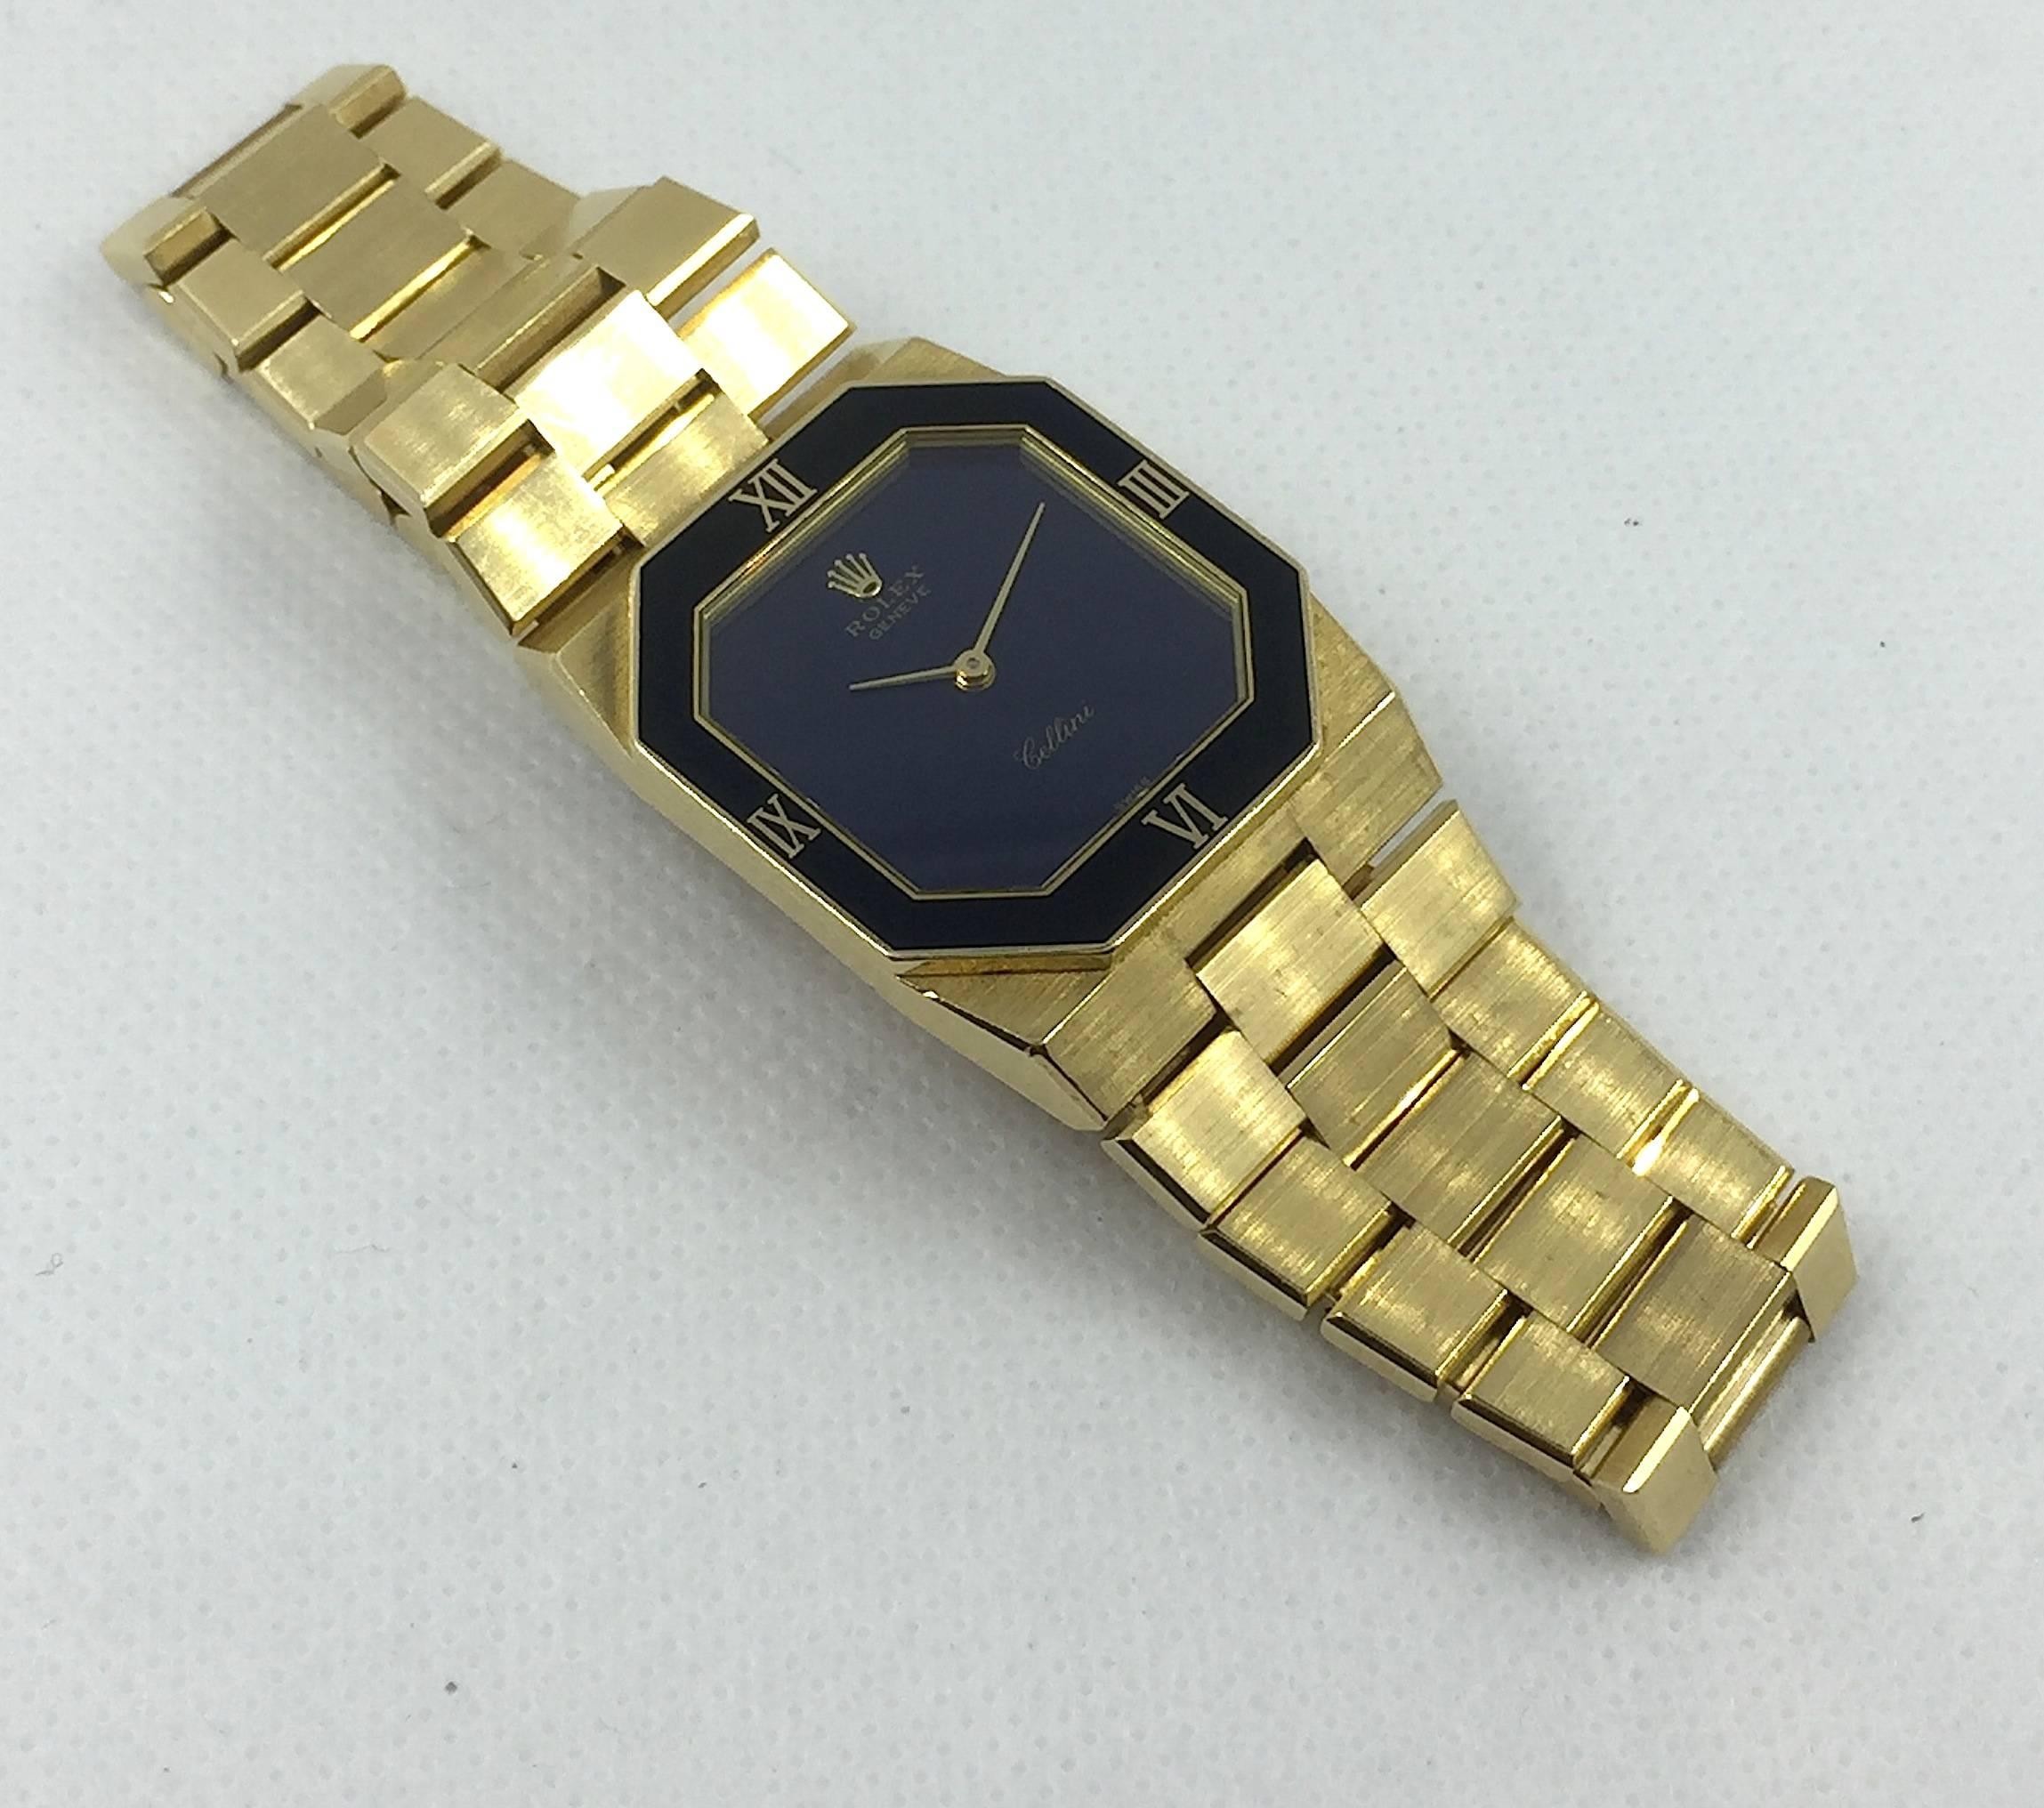 Rolex Cellini 18K Yellow Gold Manual Wind Wristwatch
Factory Blue Stone Dial with Applied Rolex Crown
Solid 18K Yellow Gold Case and Bracelet
Dark Blue Geometrical Bezel ( Bezel shows some signs of wear and marks) with Roman Numeral Markers 
24mm x